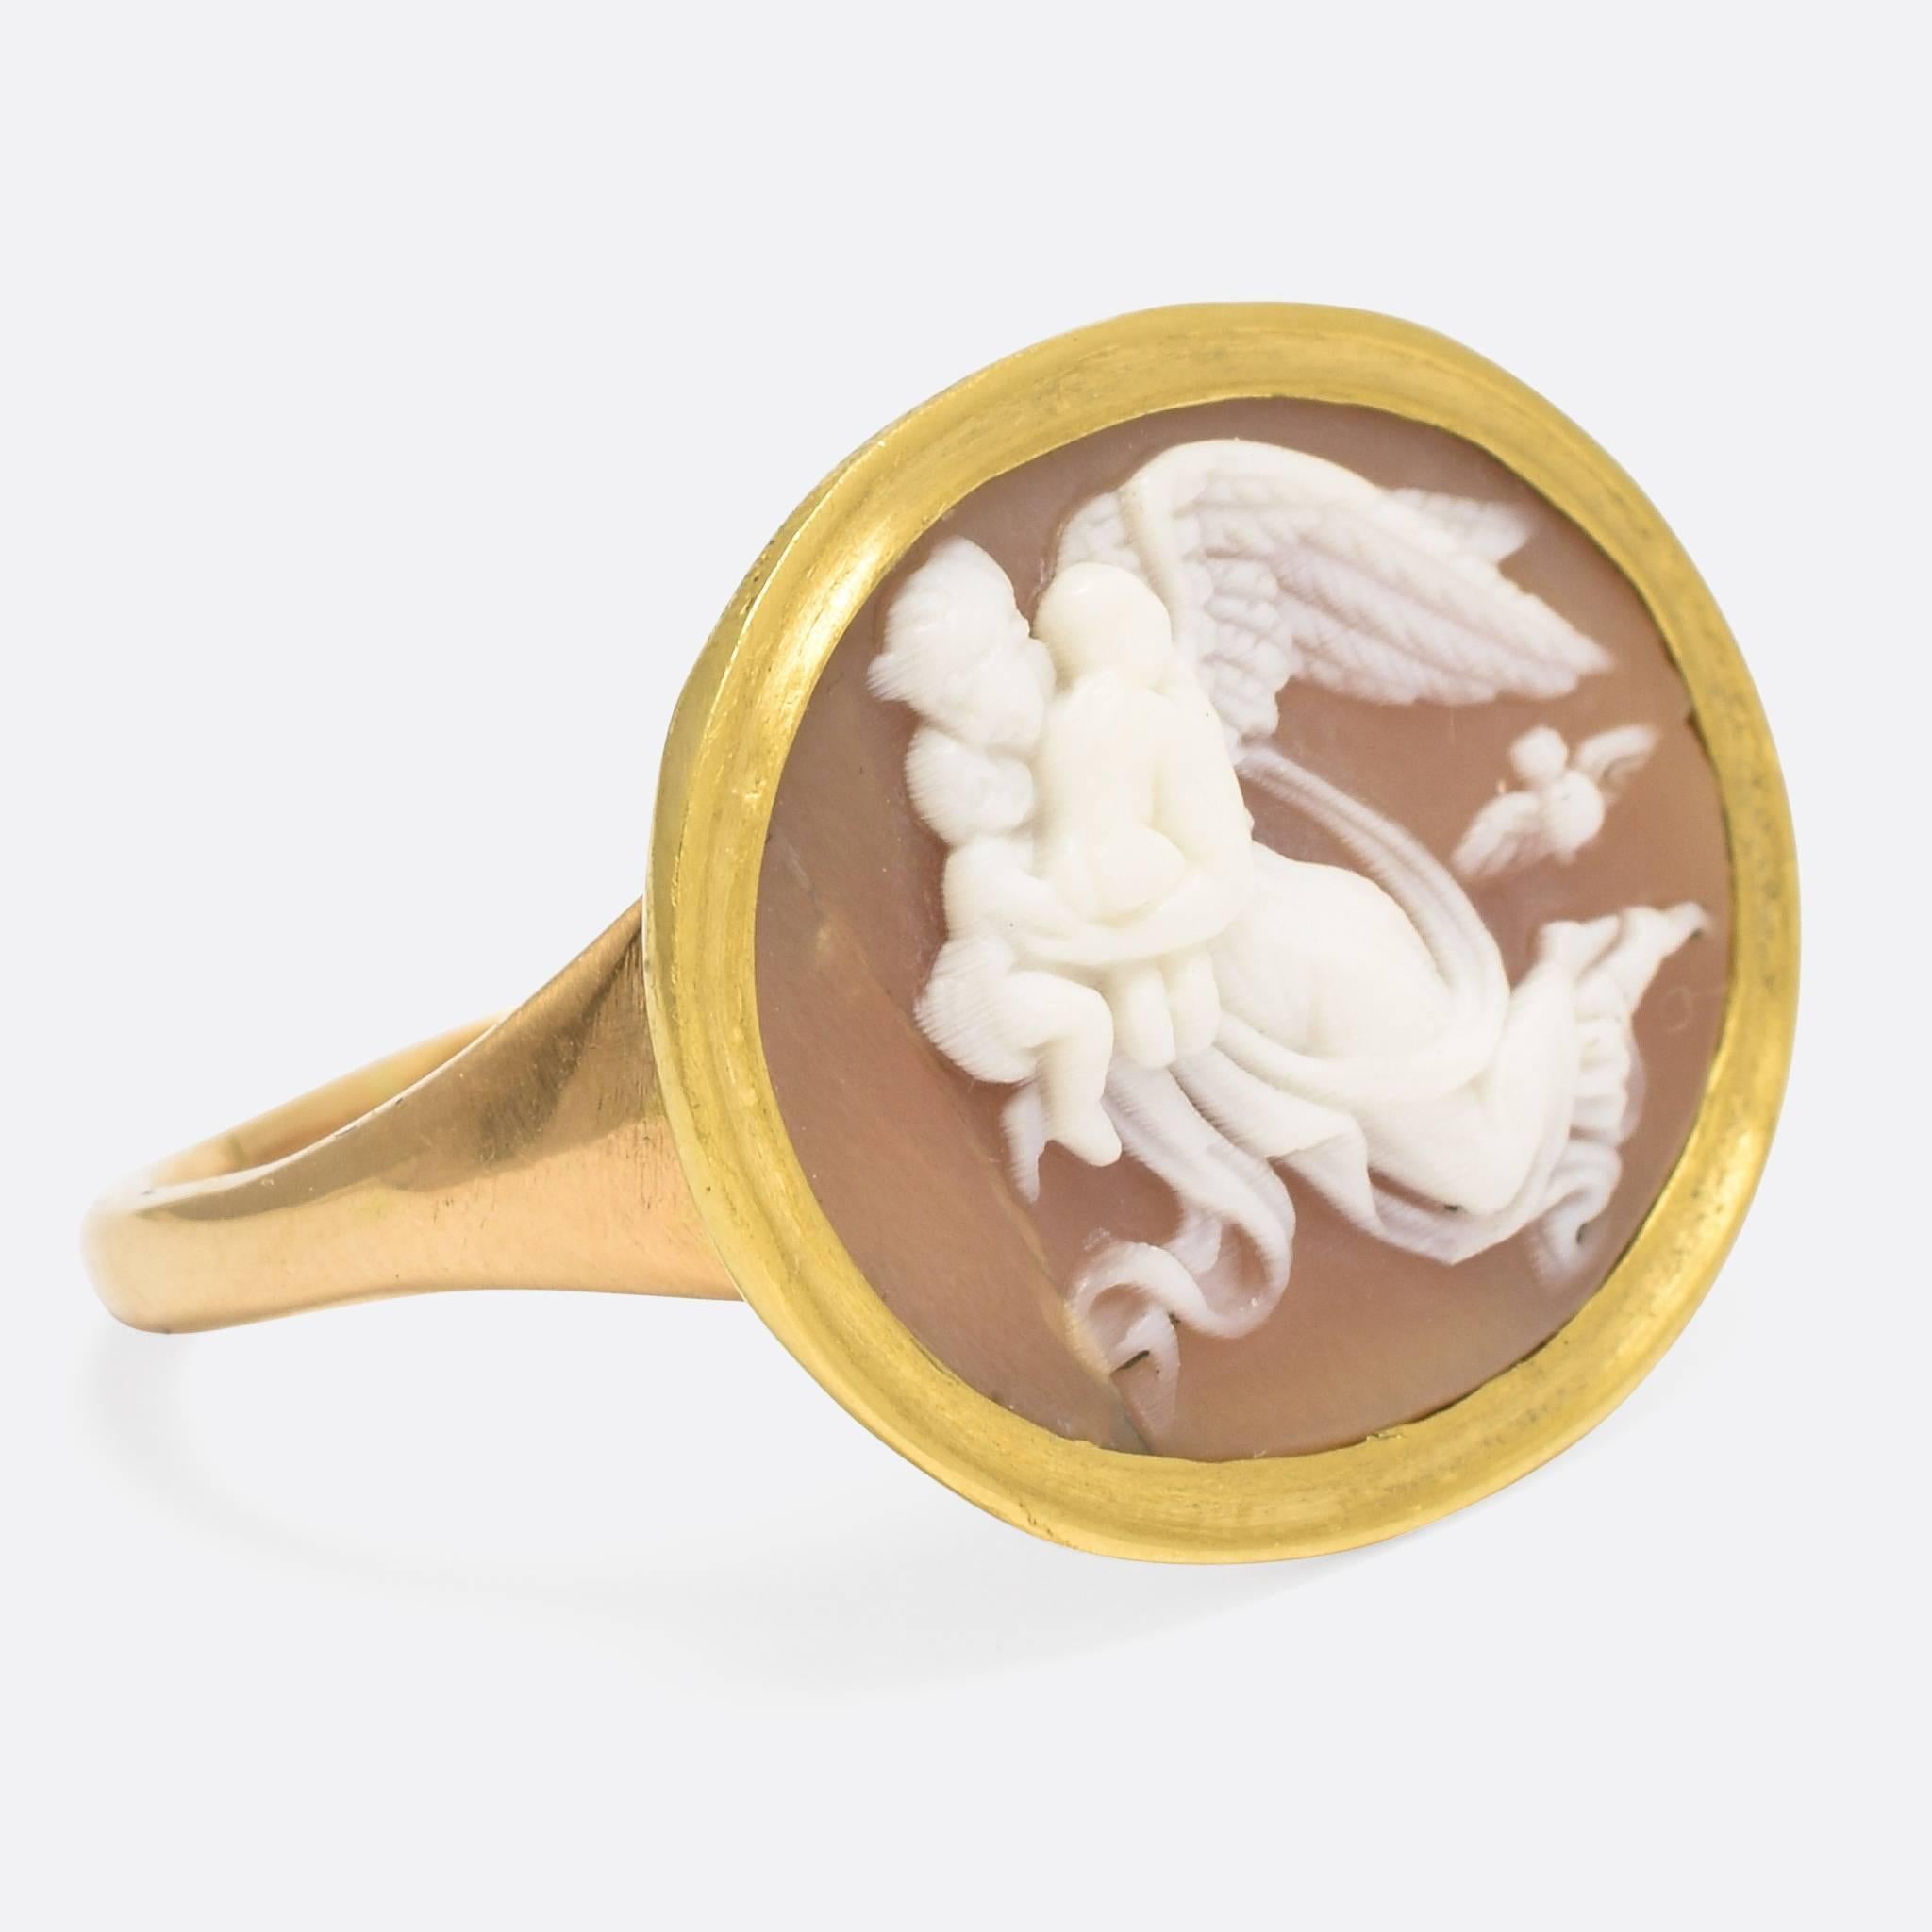 An incredible late Georgian Cameo Ring, set with a hand carved depiction of "Night" by Bertel Thorvaldsen. The original marble relief hangs in the Thorvaldsen Museum in Copenhagen, opposite it's counterpart "Day". This ring dates